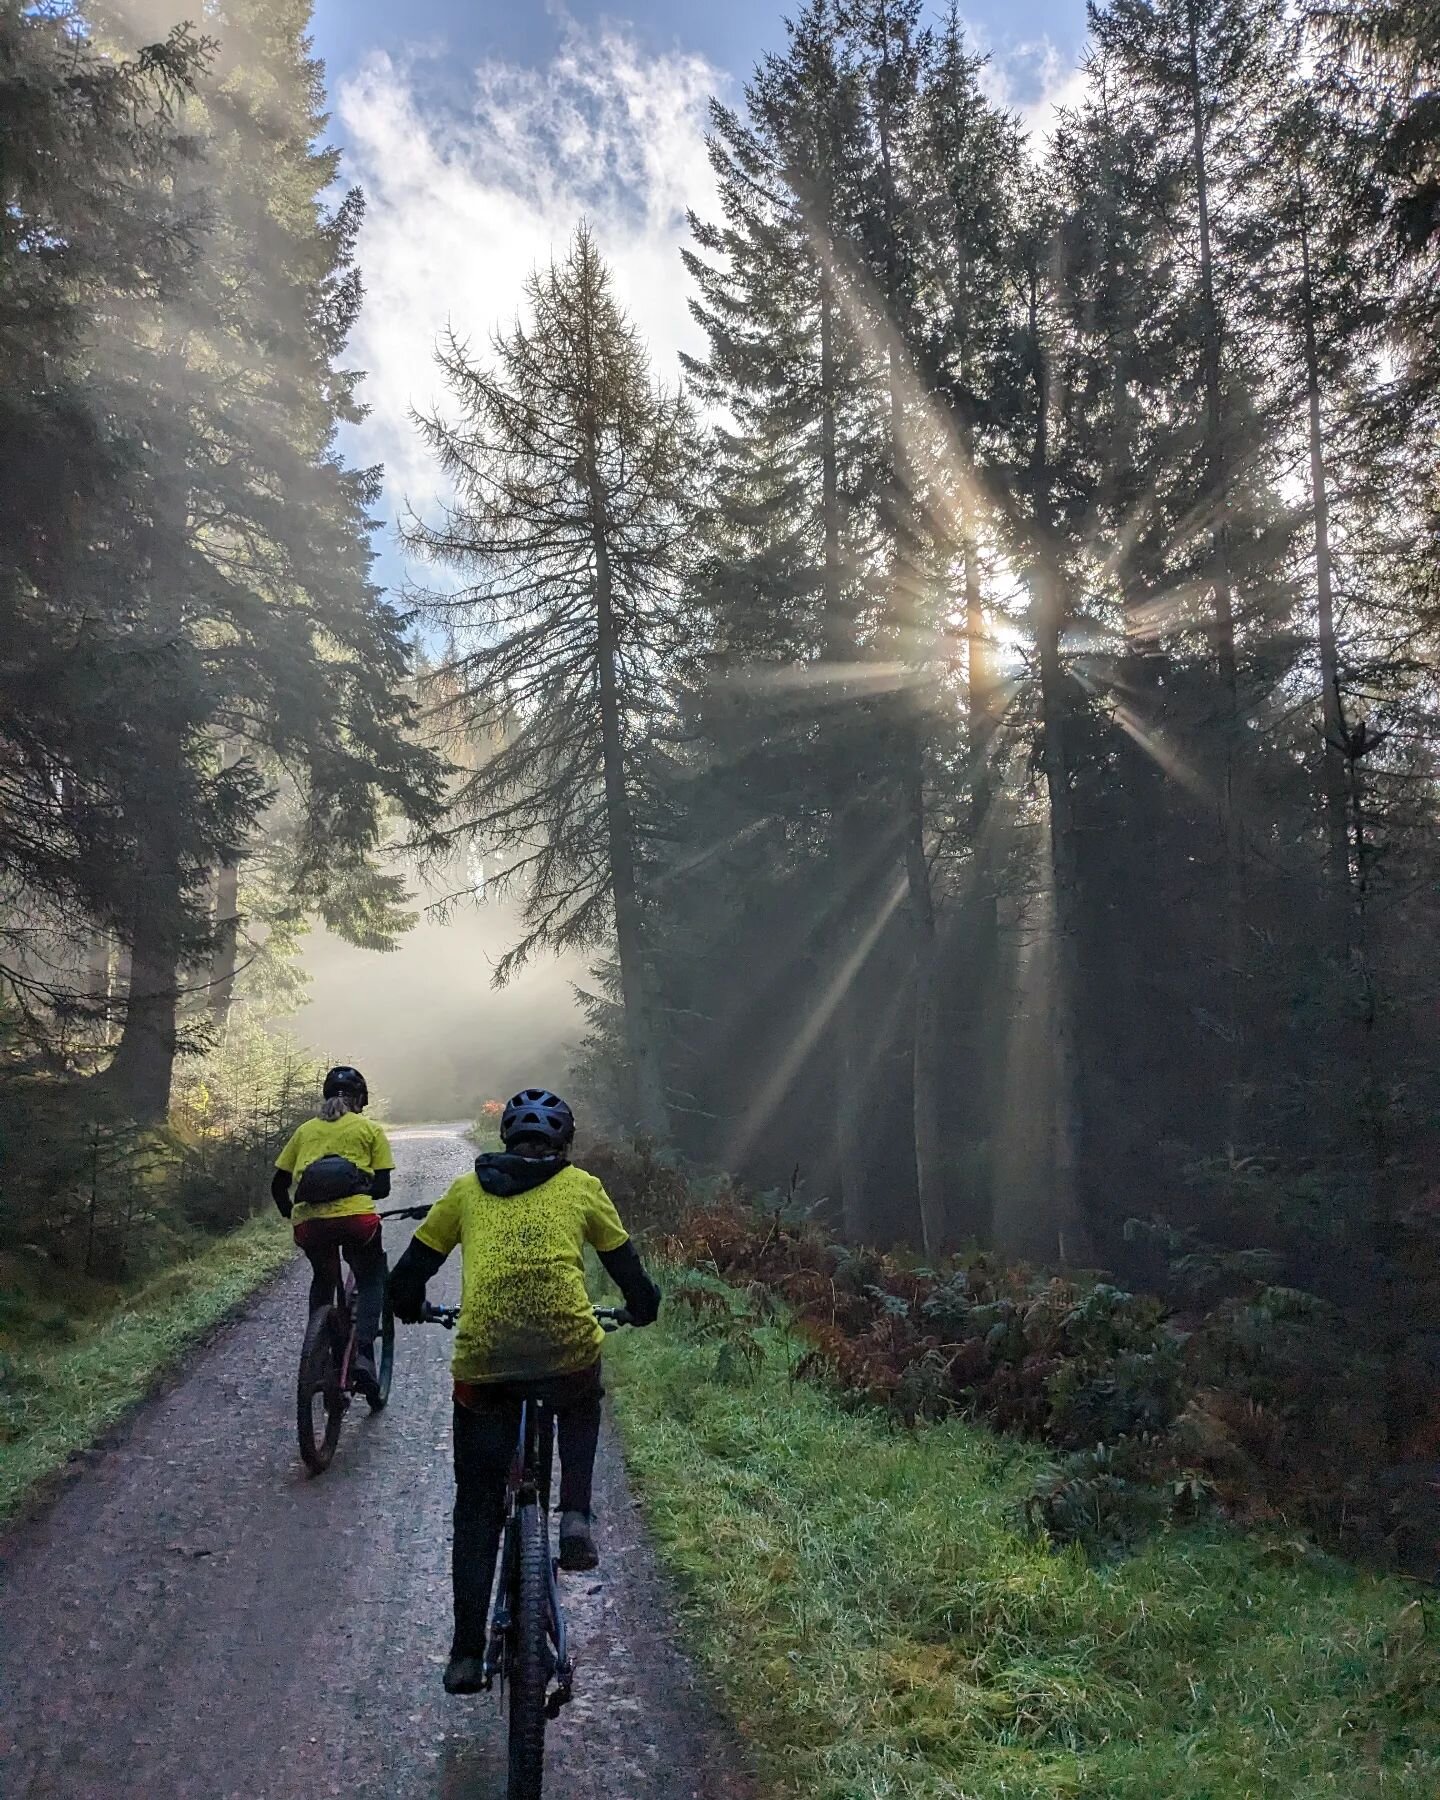 It may be a bit muddy out there, but the low autumn light on rides at this time of year makes for some pretty beautiful days out! 👌🍂🔥
Tweed Valley riding is fun whatever the weather too, always a pleasure spending time in this valley!

#endlesstra